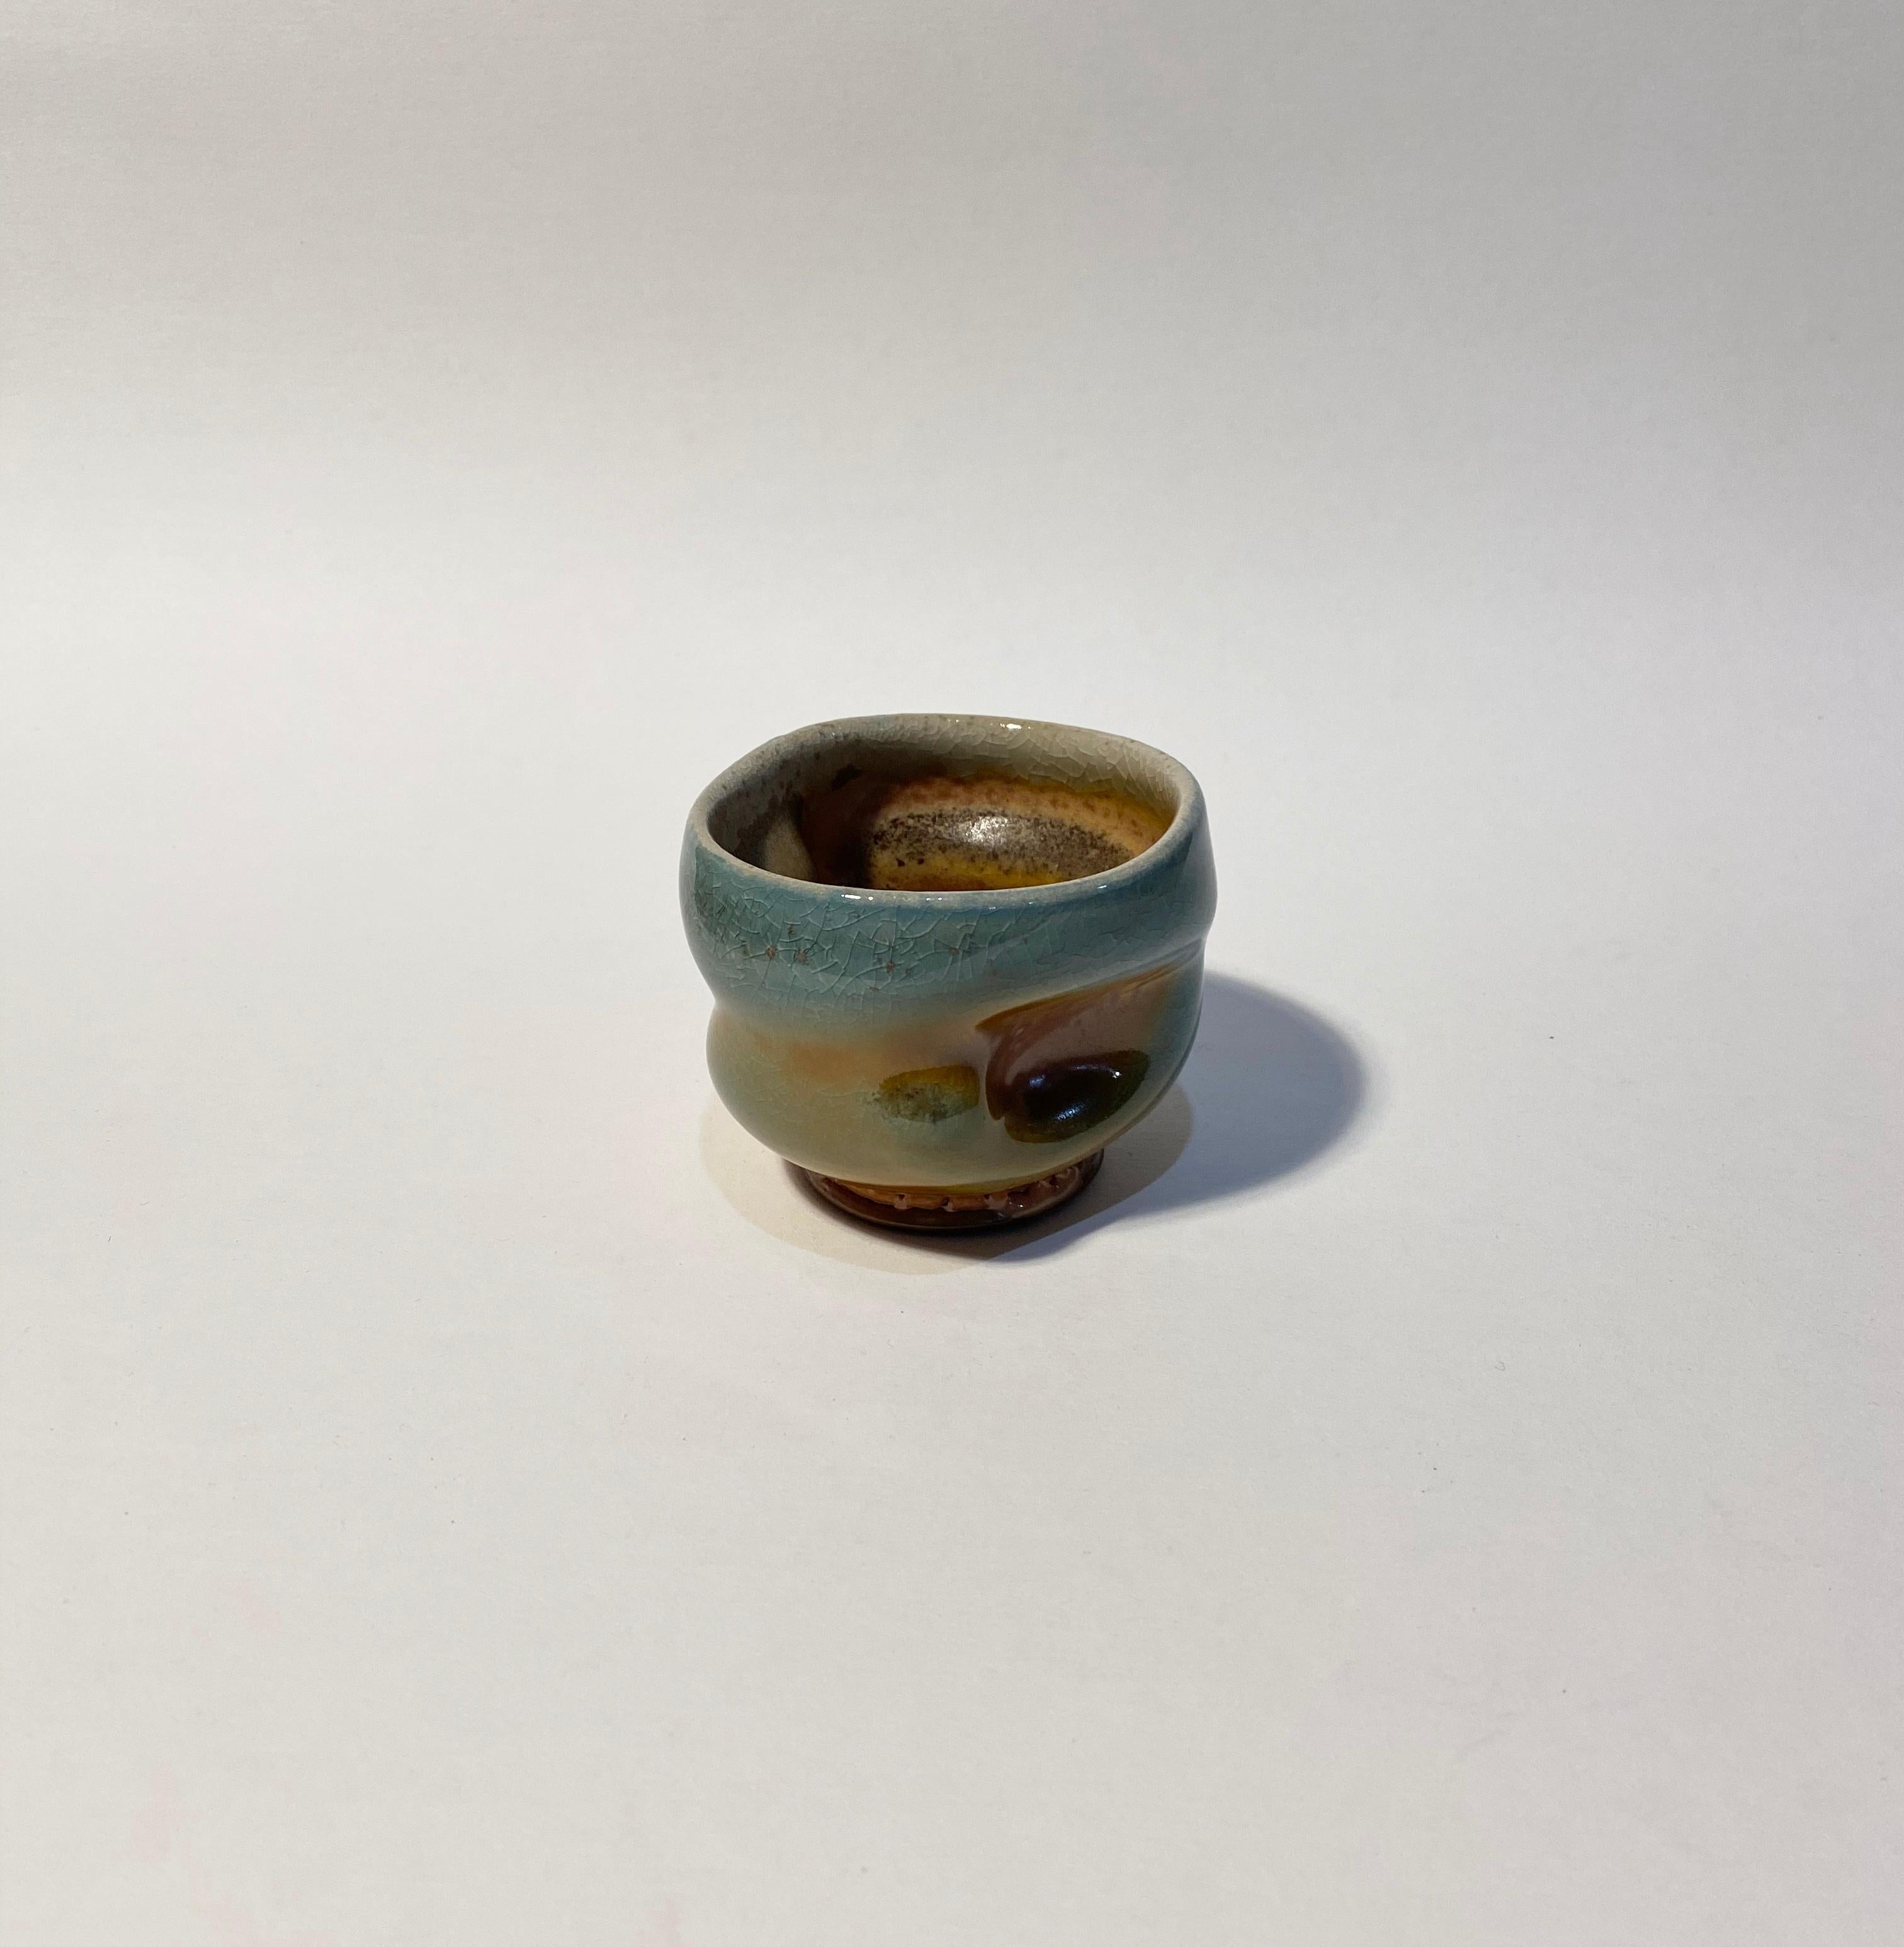 Chris Gustin (born 1952)
Whiskey Cup, 2019
Stoneware
2 1/2 x 3 3/8 x 3 1/4 inches
Anagama wood fired
Signed on the underside with the artist's device

Chris Gustin is a studio artist and Emeritus Professor at the University of Massachusetts,